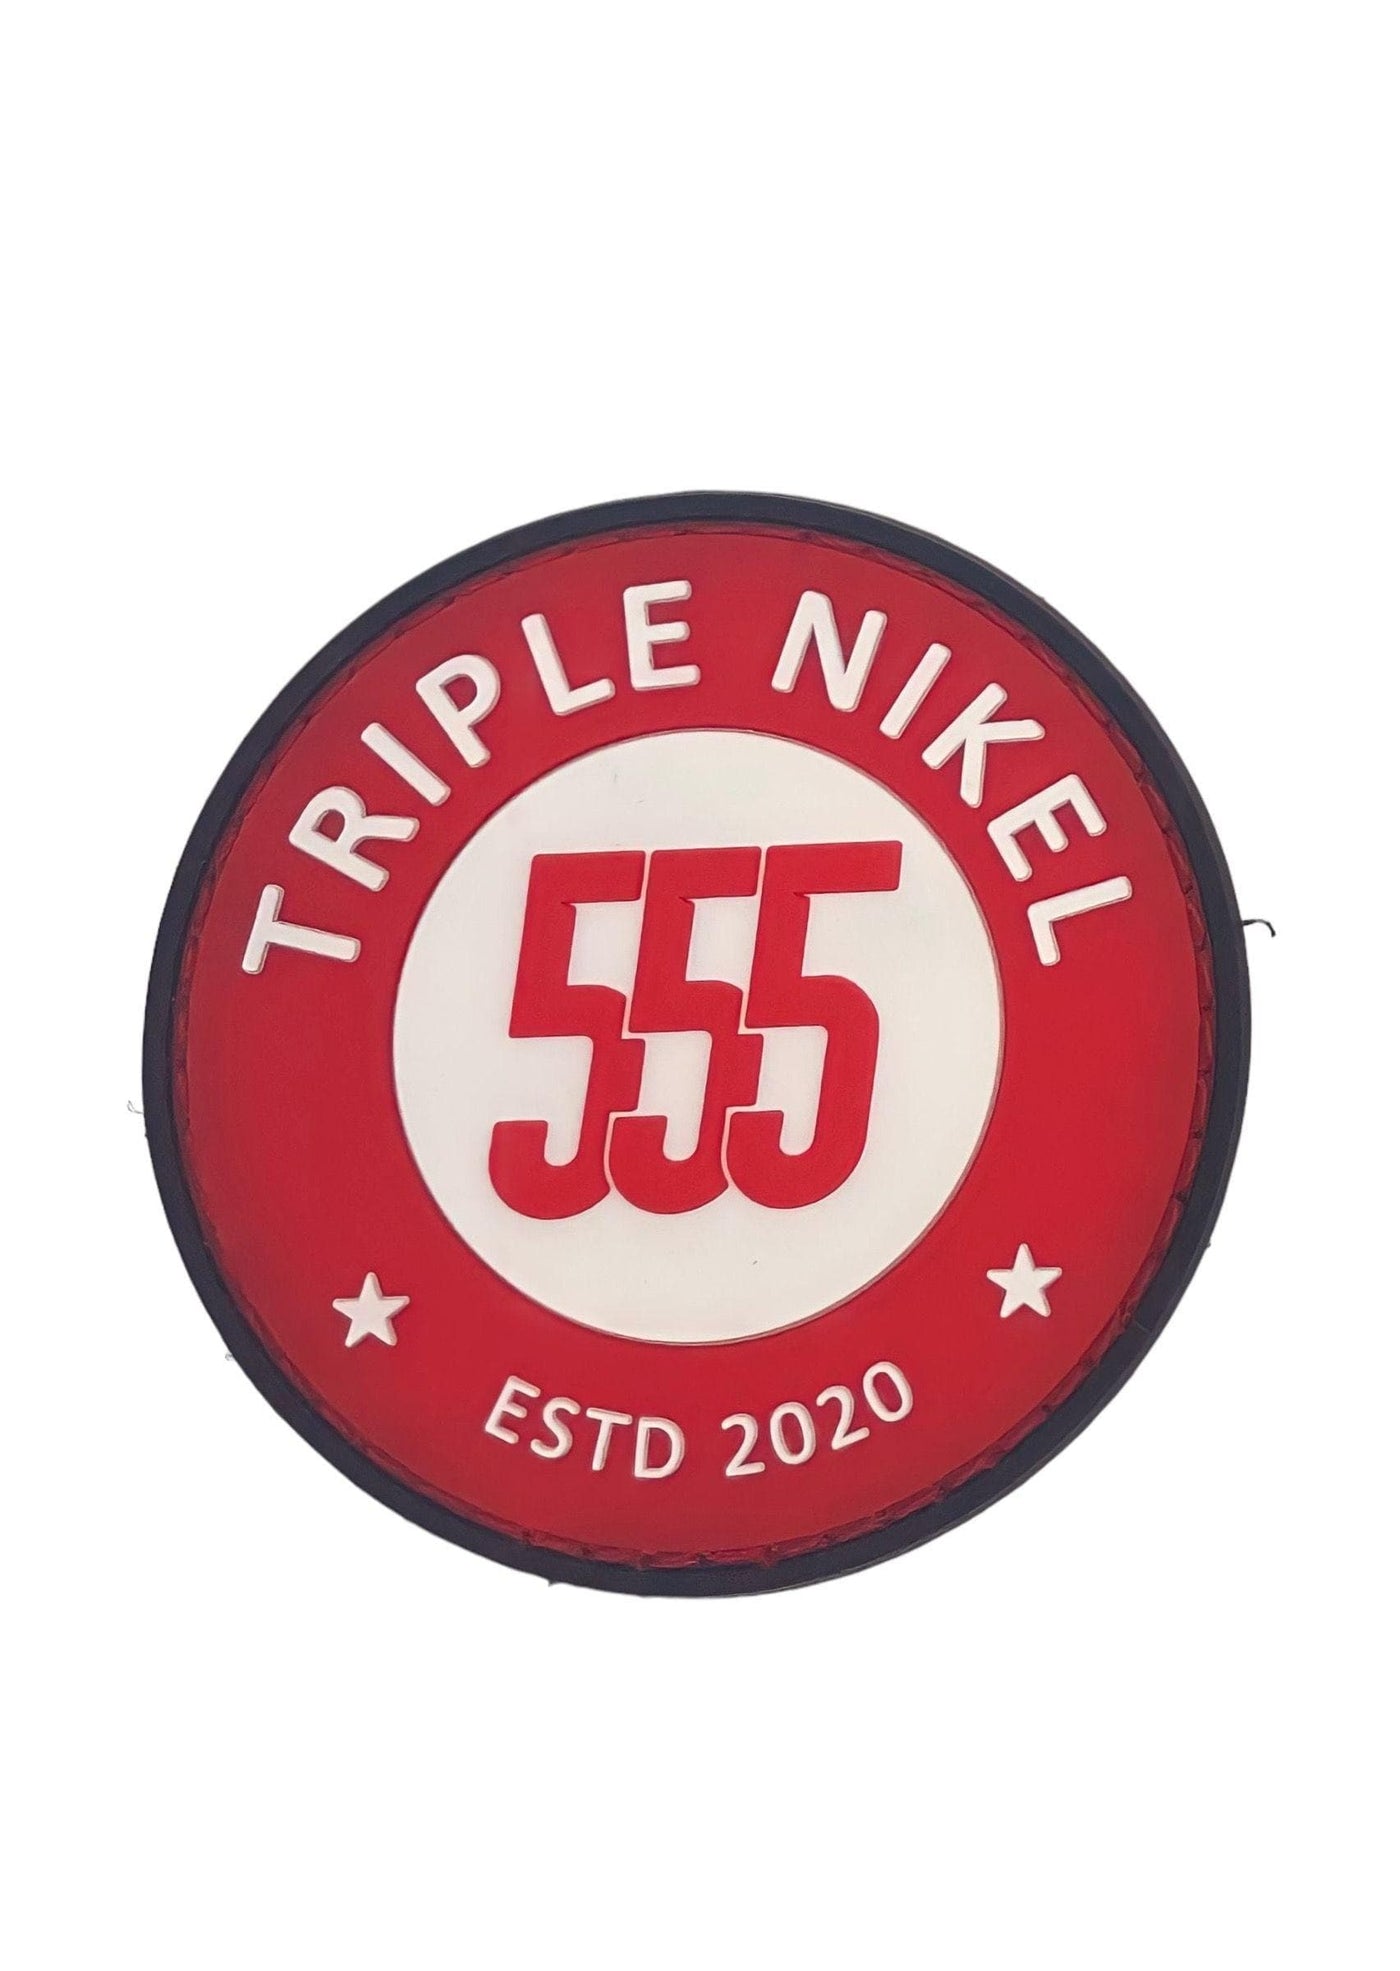 Triple Nikel Rubber PVC Patches Team Gear / Red Triple Nikel Accessory Tactical 555 Team Rubber PVC Patch